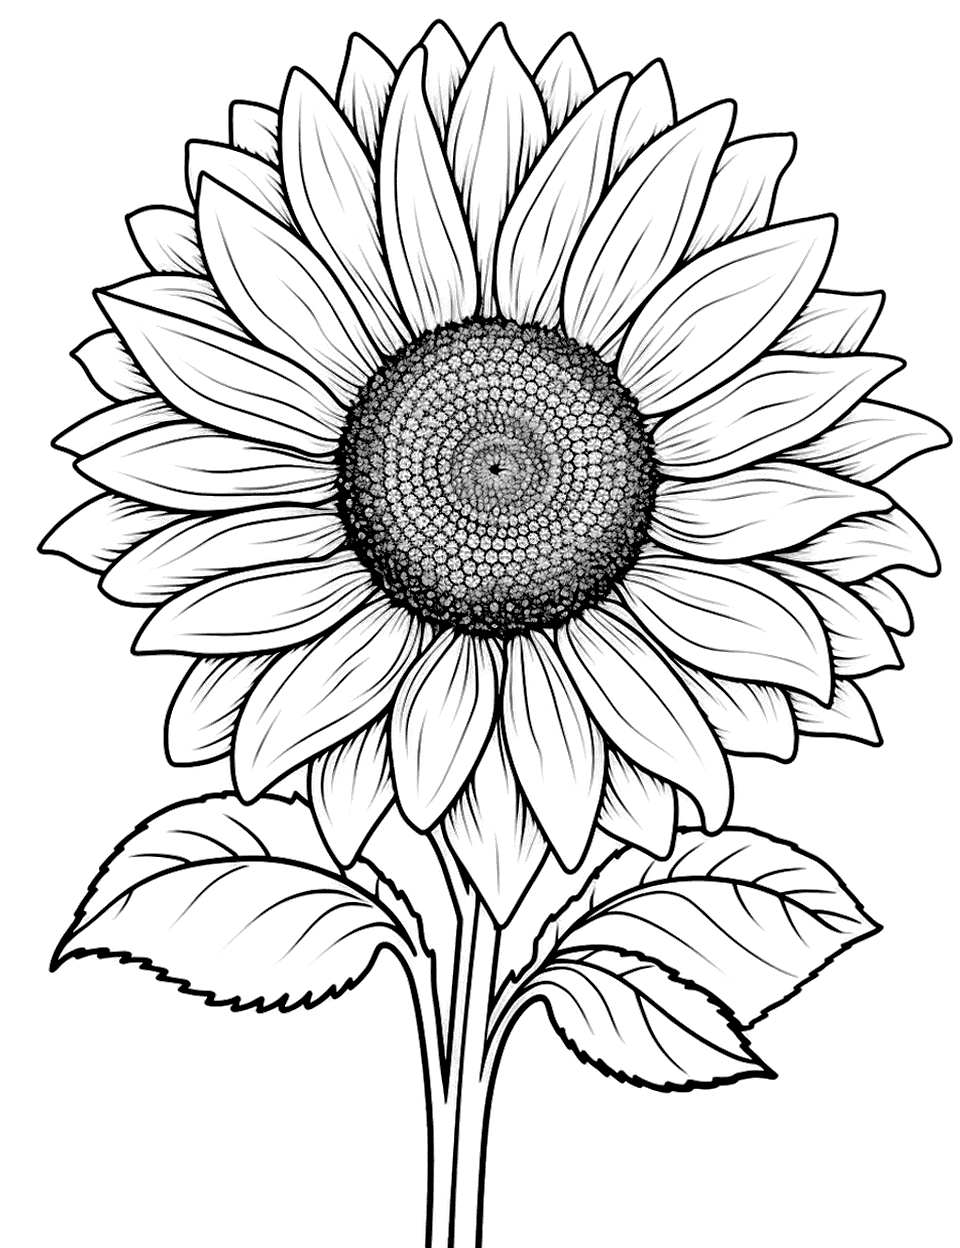 Realistic Sunflower Portrait Coloring Page - A close-up of a sunflower, focusing on its detailed structure.